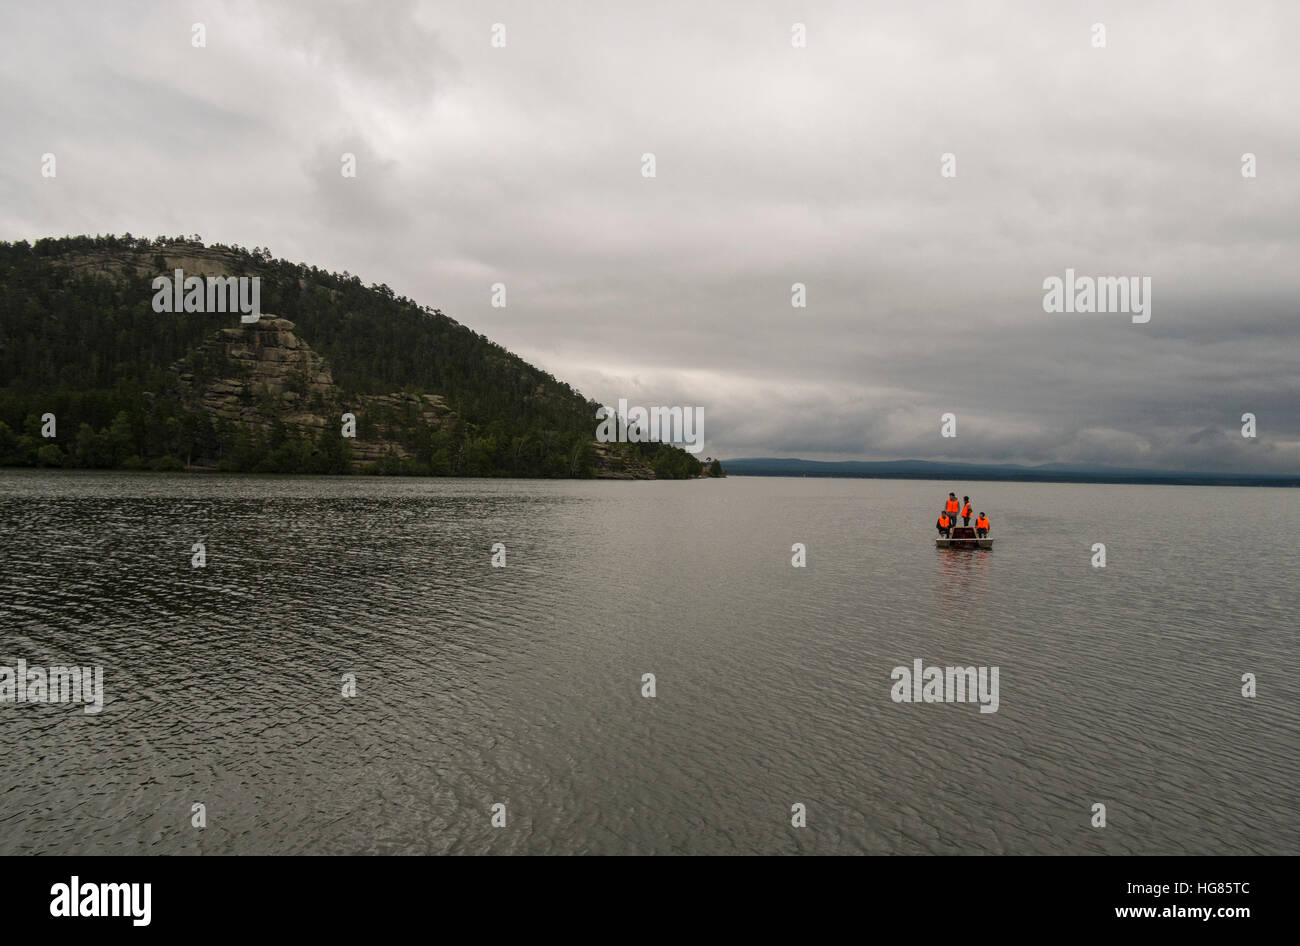 Mid distance view of friends boating in river against cloudy sky Stock Photo